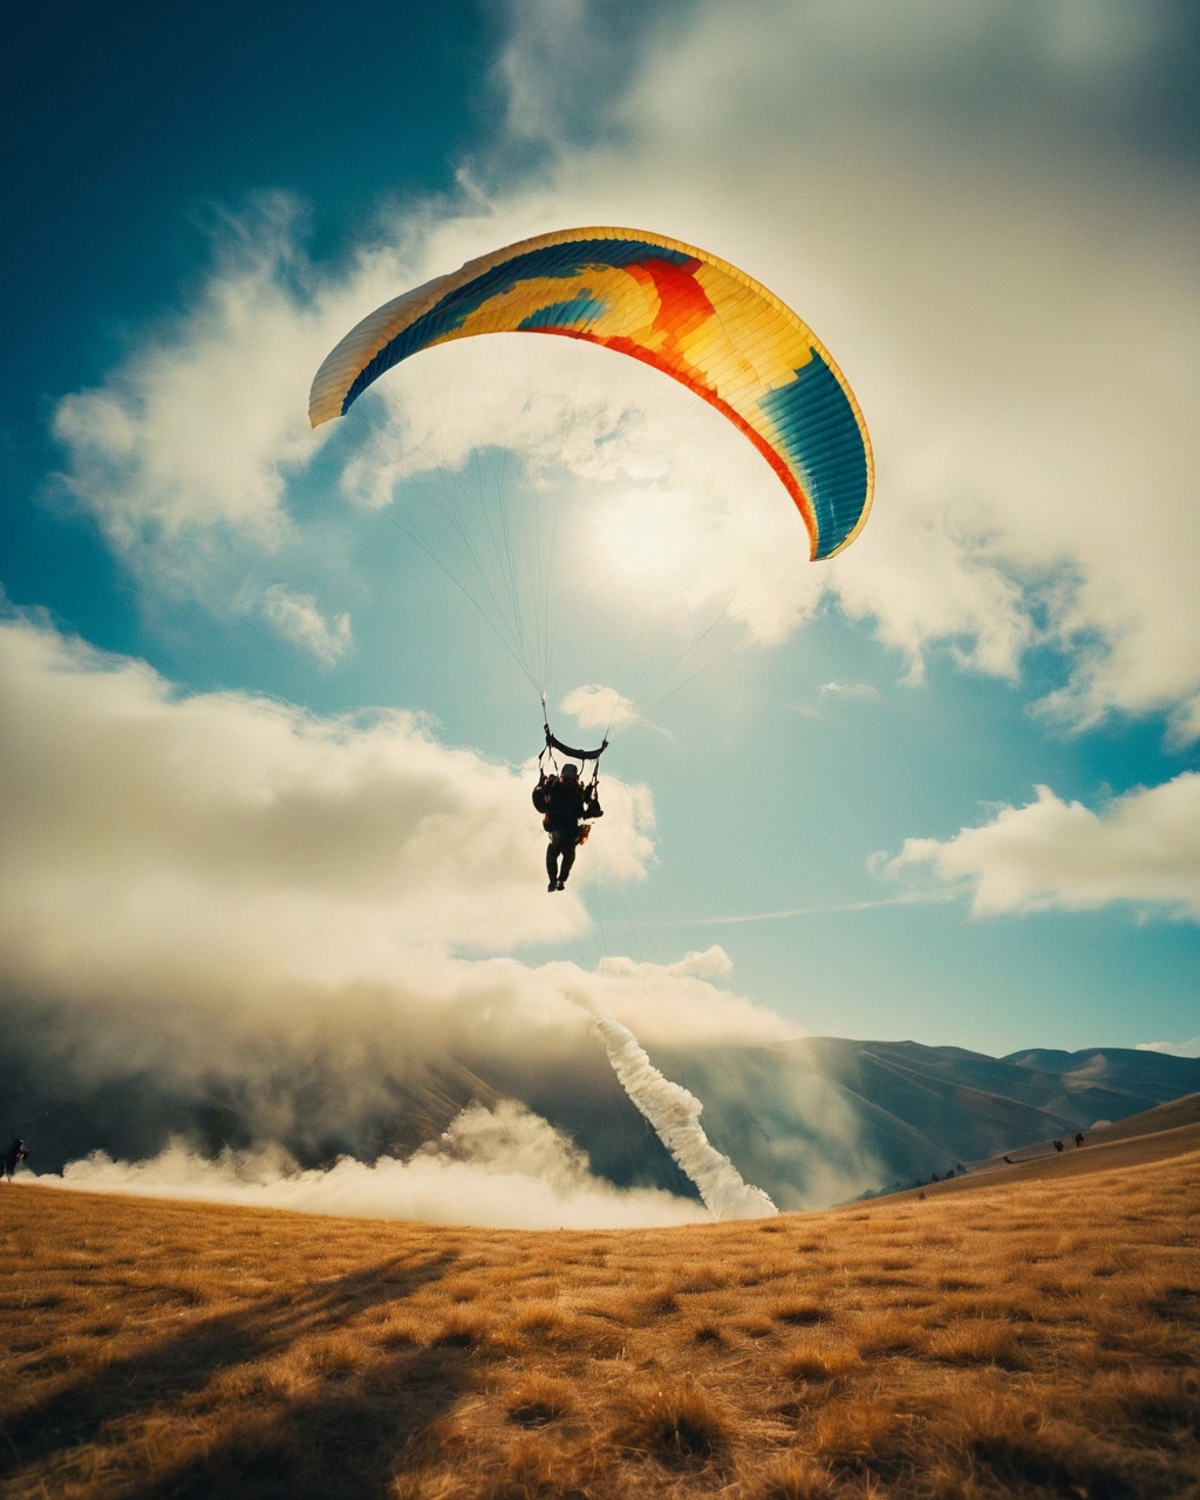 A person paragliding in the air with mountains in the background.